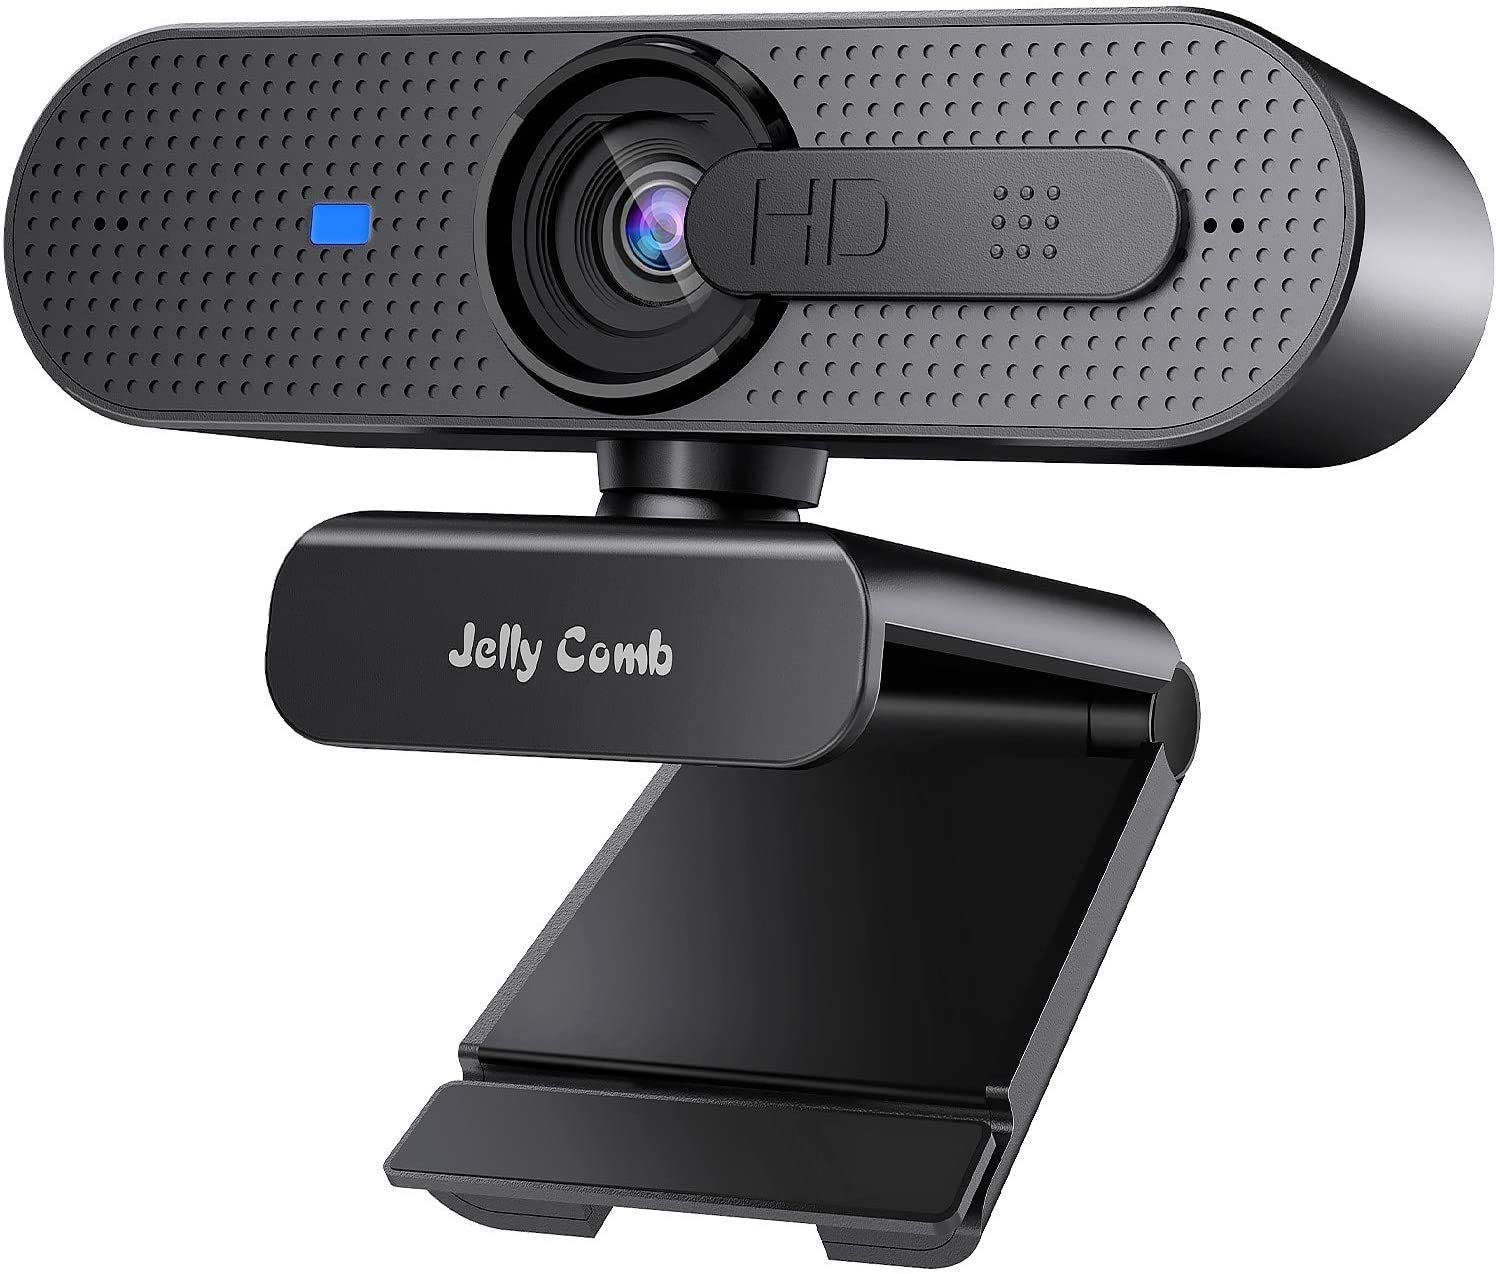 1080P Webcam With Privacy Shuttter, Jelly Comb HD Autofocus Webcam only $20.99